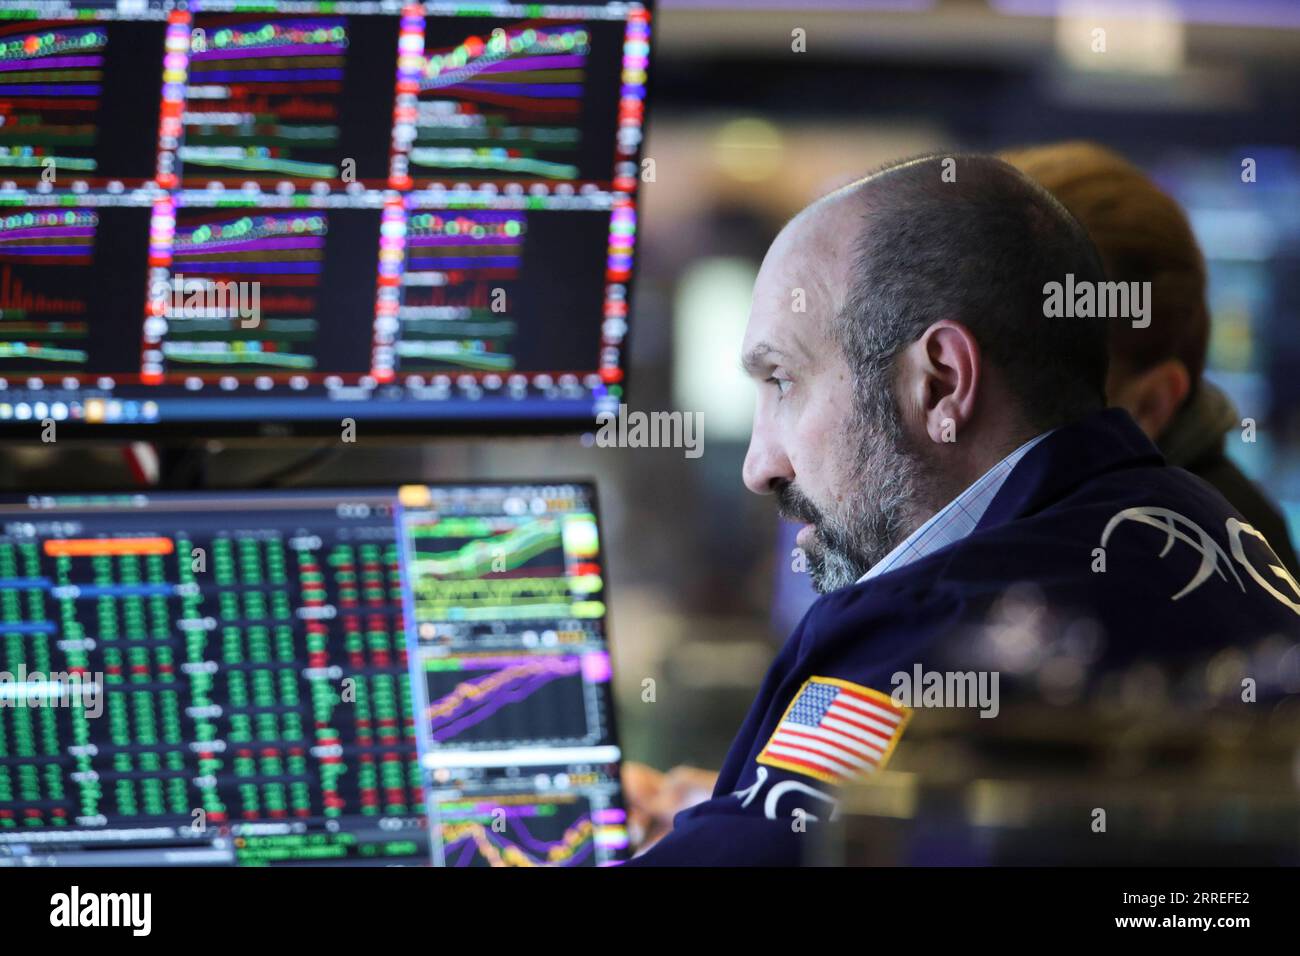 220226 -- NEW YORK, Feb. 26, 2022 -- A trader works at the New York Stock Exchange in New York, the United States, Feb. 25, 2022. U.S. stocks surged on Friday with the Dow logging its best day in over a year, as Wall Street closely followed updates on the Russia-Ukraine tensions. The Dow Jones Industrial Average jumped 834.92 points, or 2.51 percent, to 34,058.75. The S&P 500 rose 95.95 points, or 2.24 percent, to 4,384.65. The Nasdaq Composite Index increased 221.03 points, or 1.64 percent, to 13,694.62.  U.S.-NEW YORK-STOCK MARKET WangxYing PUBLICATIONxNOTxINxCHN Stock Photo